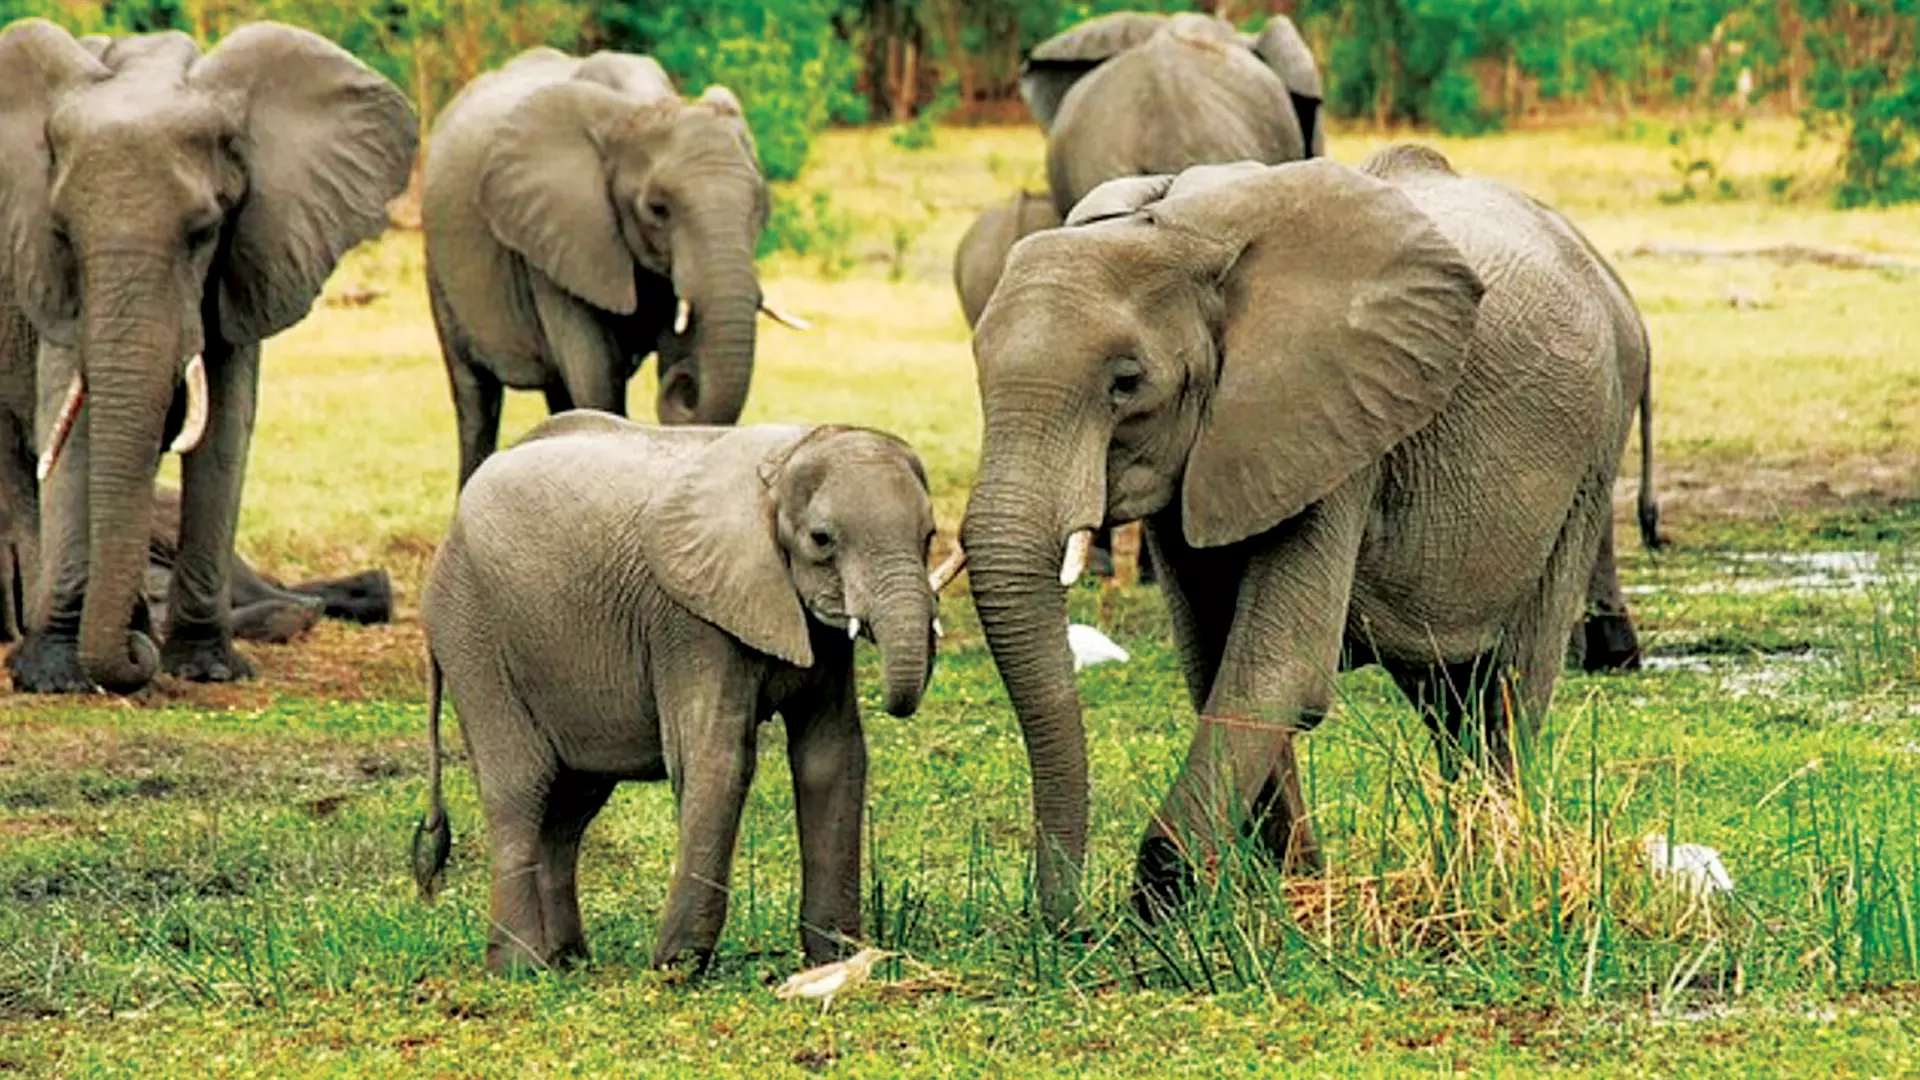 Elephant calves born in plantations return to the area even if they are chased away to the forests since they do not know any other life. Photo: PTI